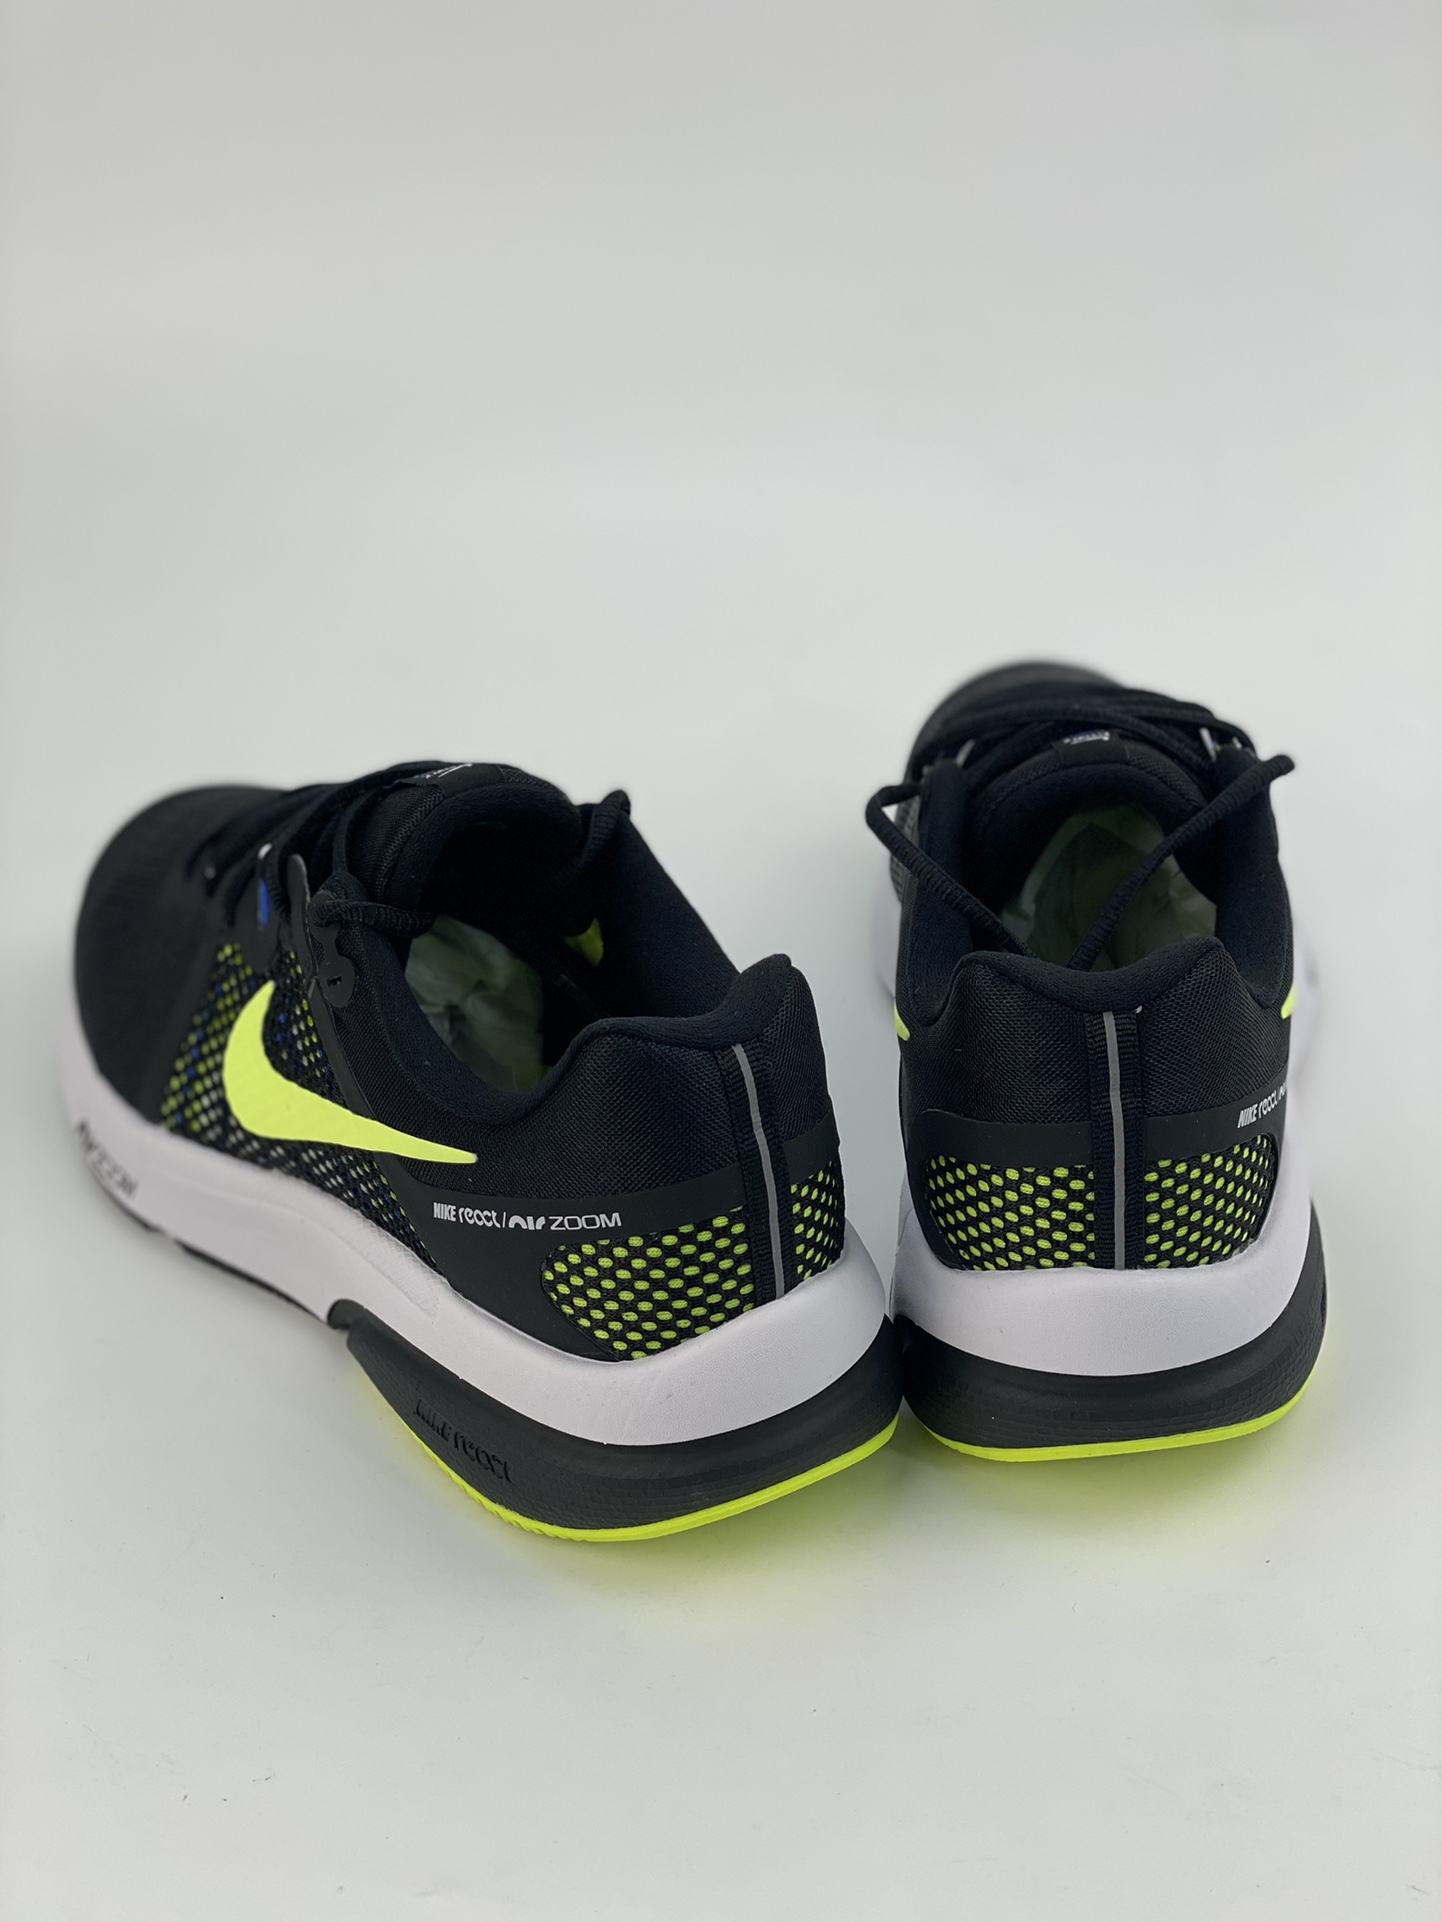 Nike Zoom Prevail mesh breathable running shoes DA1102-003